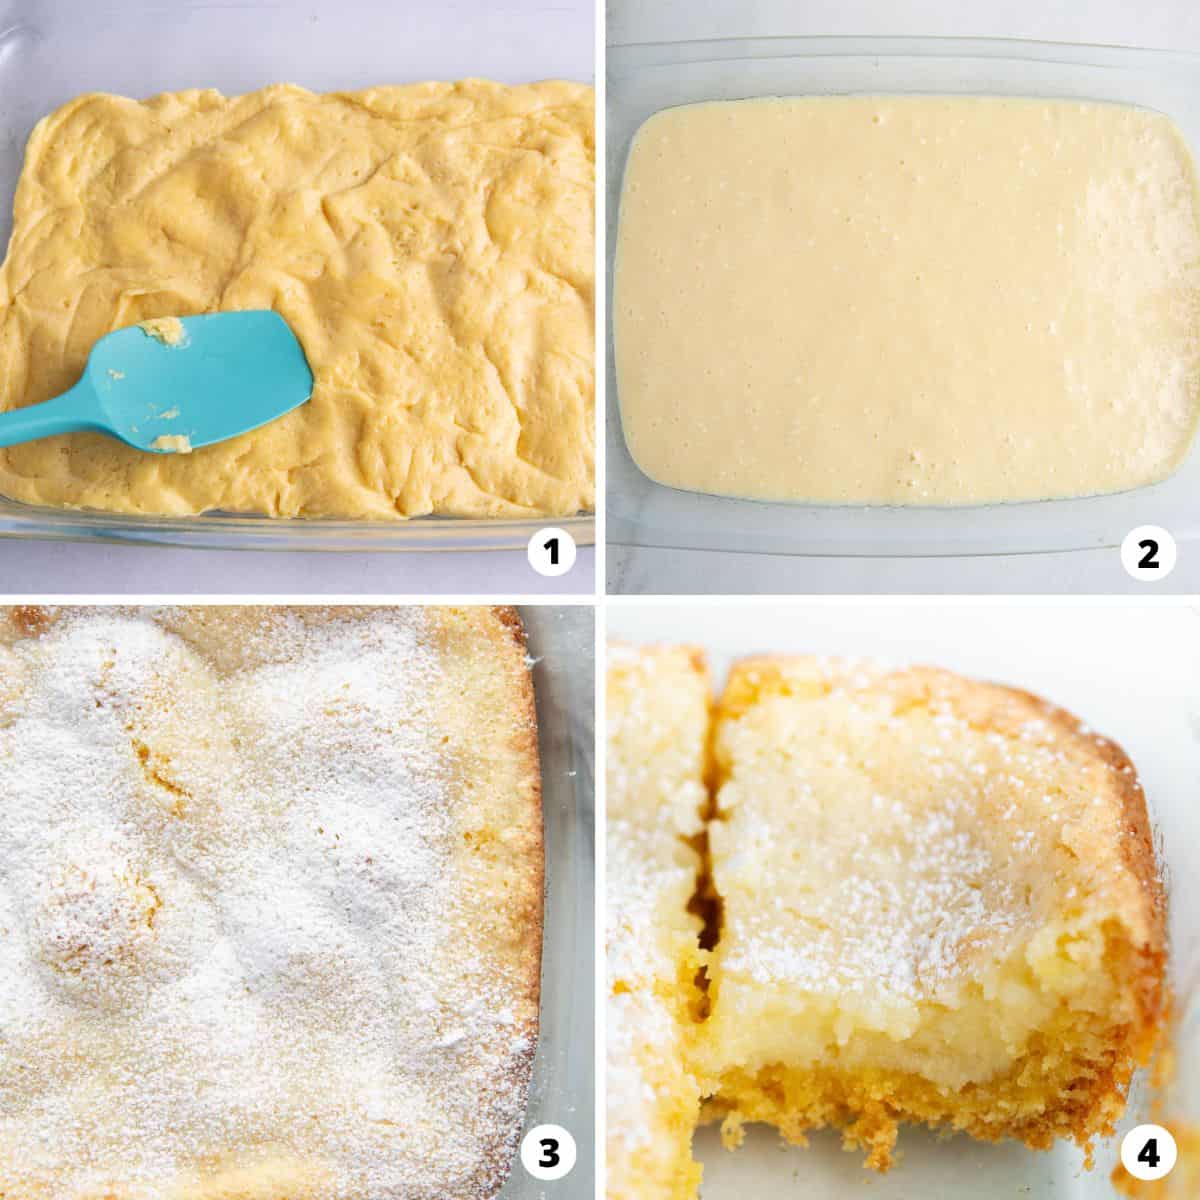 Showing how to make gooey butter cake in a 4 step collage.